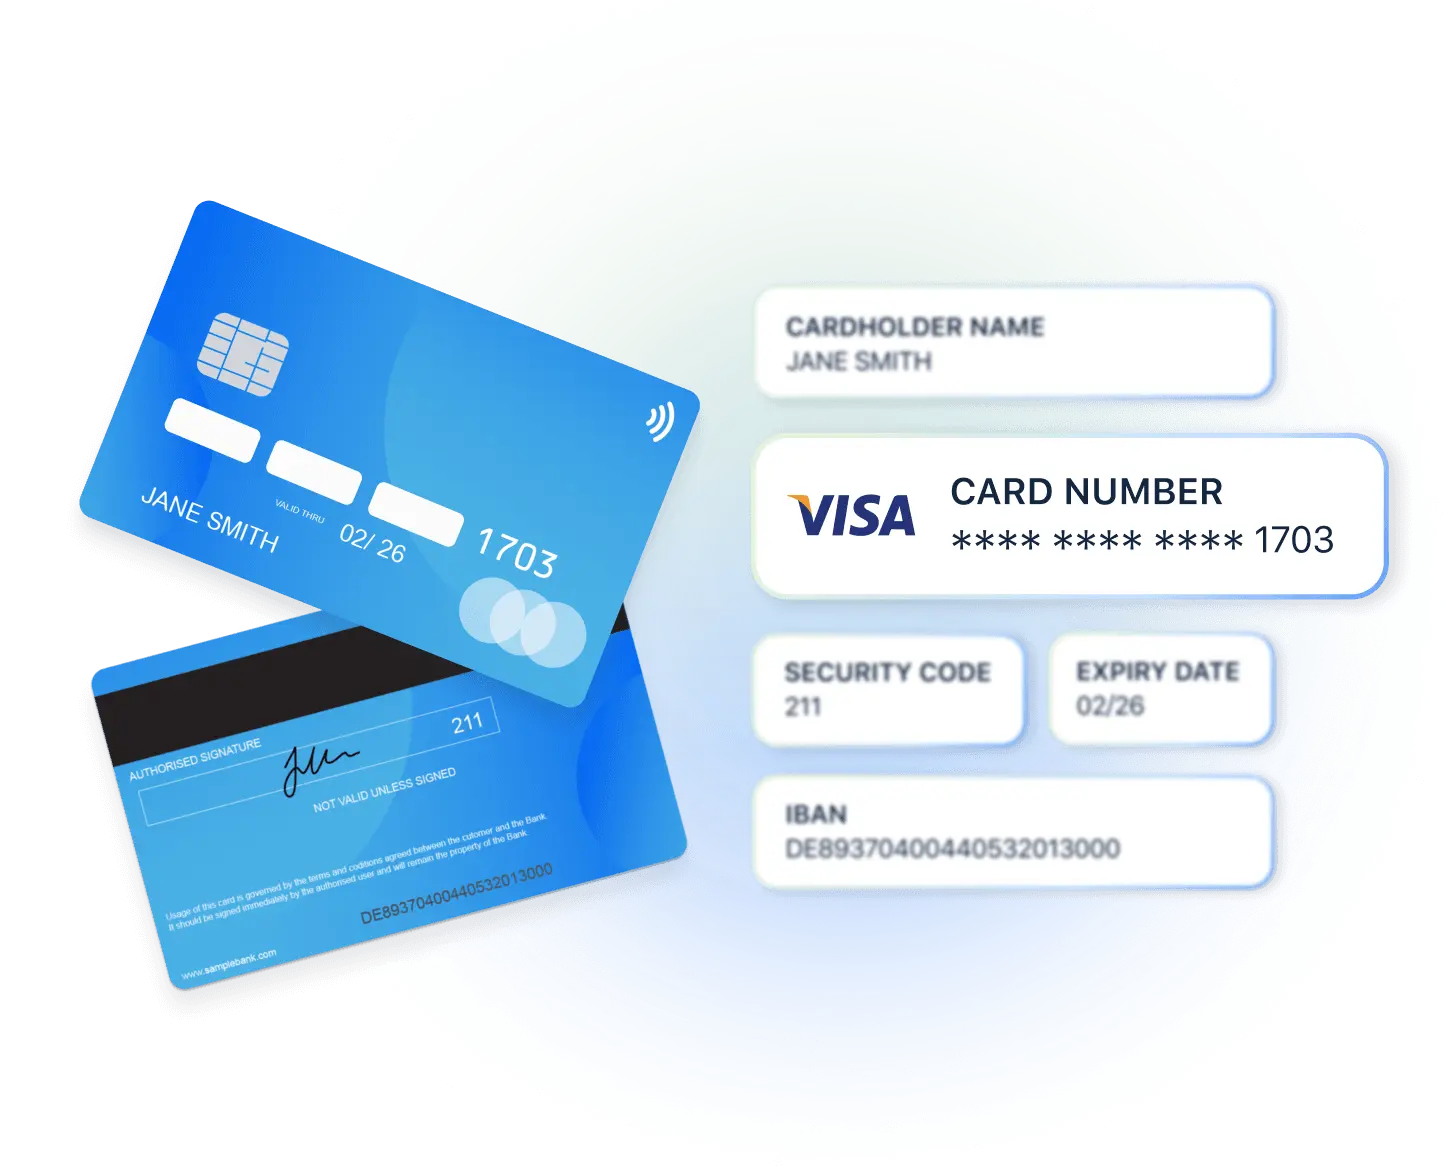 Illustration of a Visa card, displaying both sides with focused, masked extracted data, including cardholder name, card number, security code, expiry date, and IBAN.